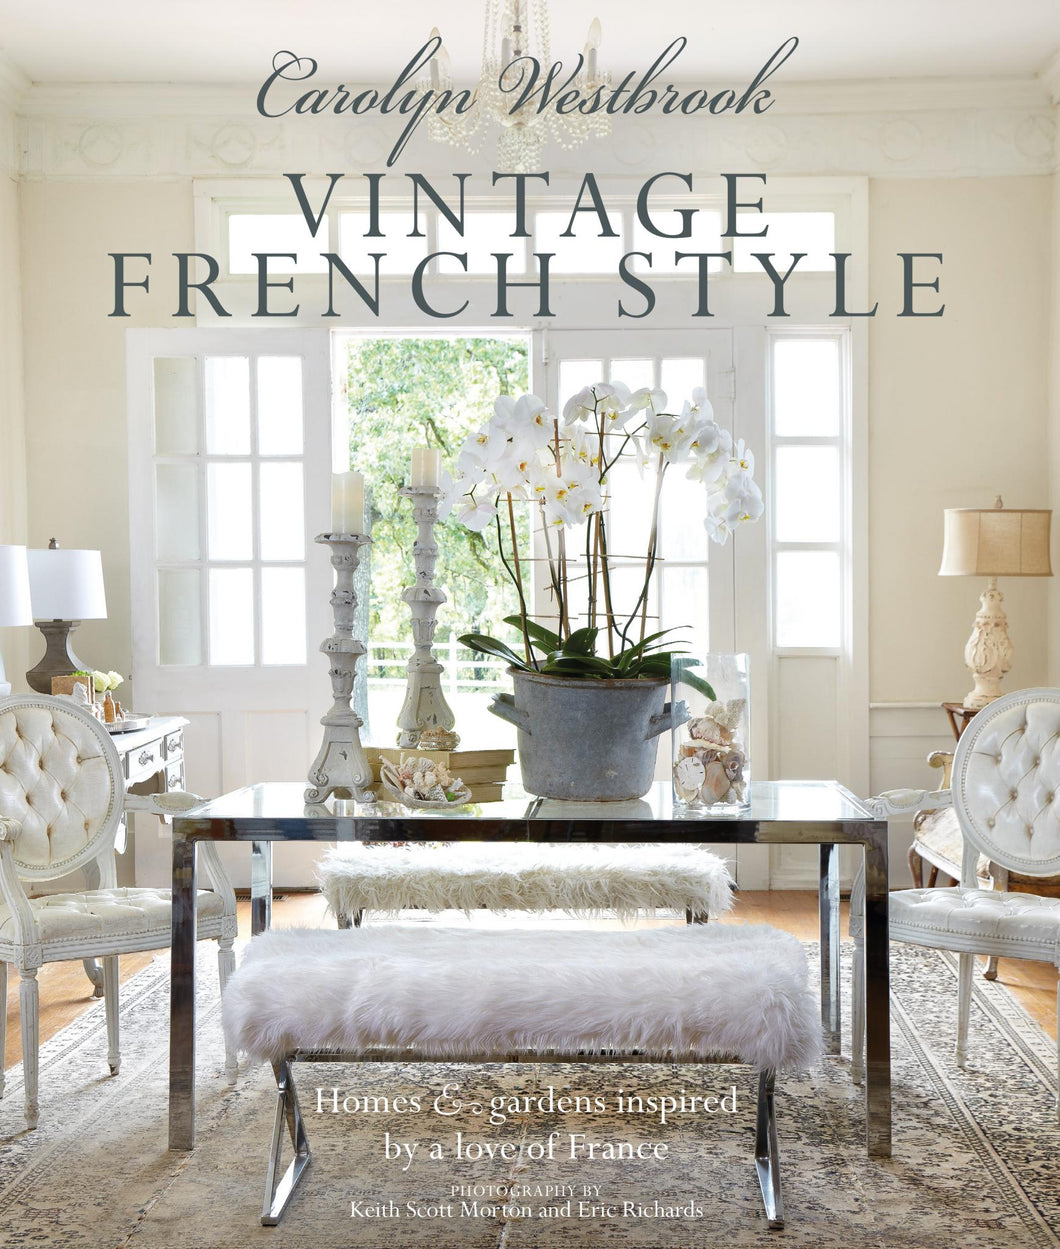 Carolyn Westbrook: Vintage French Style